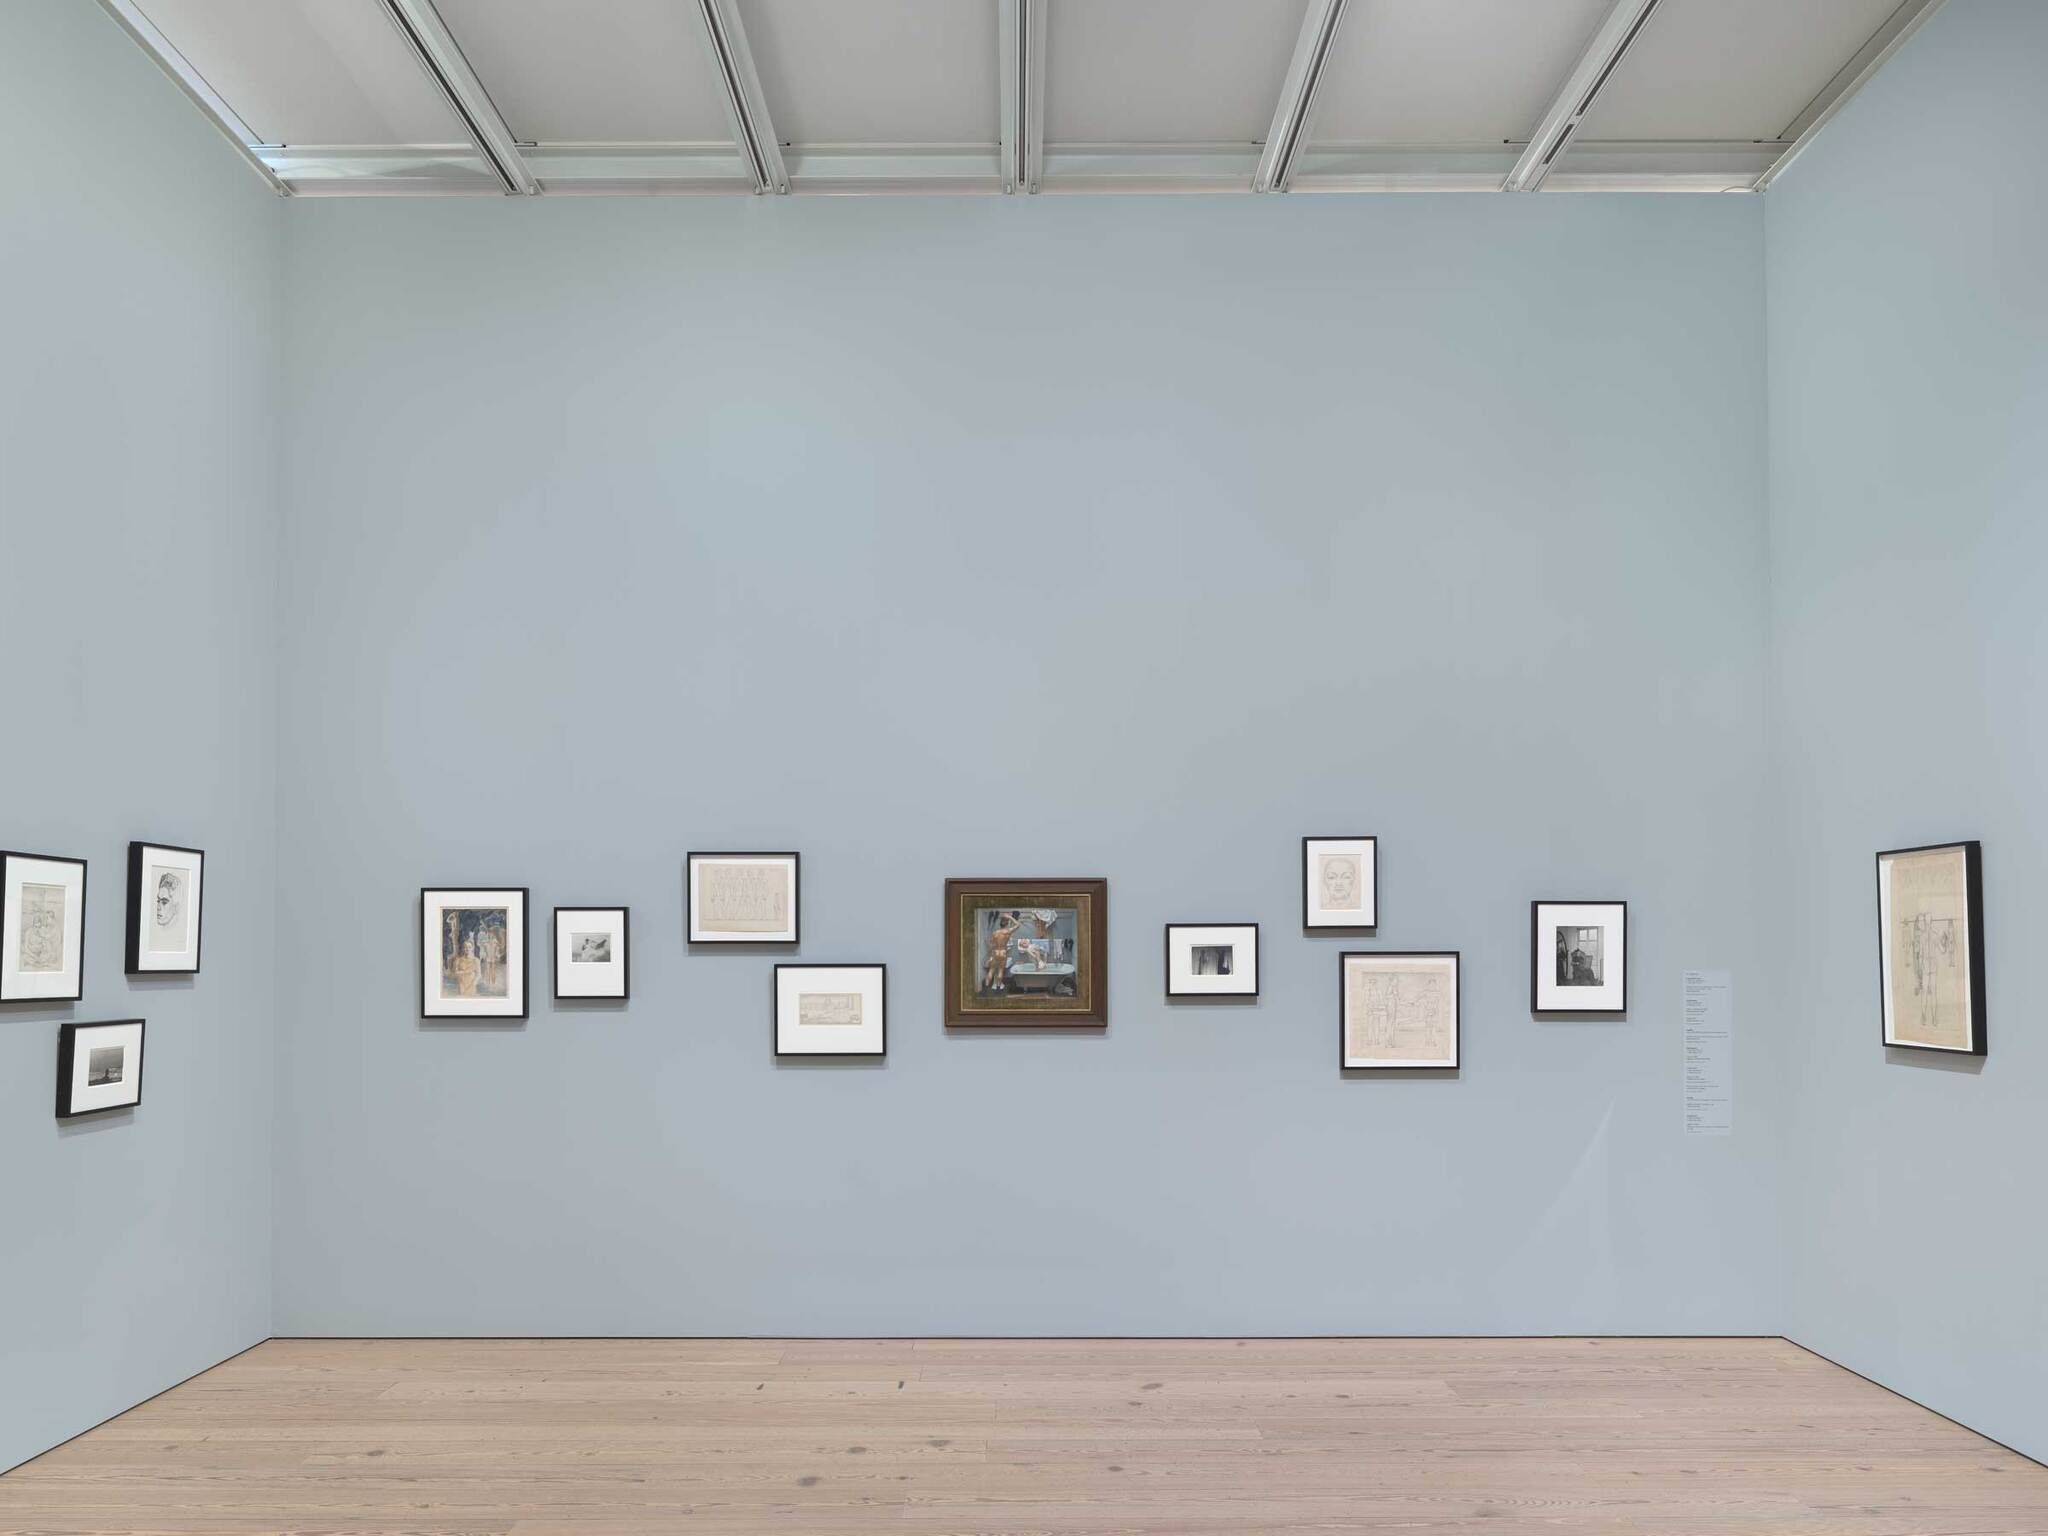 Art gallery interior with various framed artworks on a light blue wall and wooden flooring.